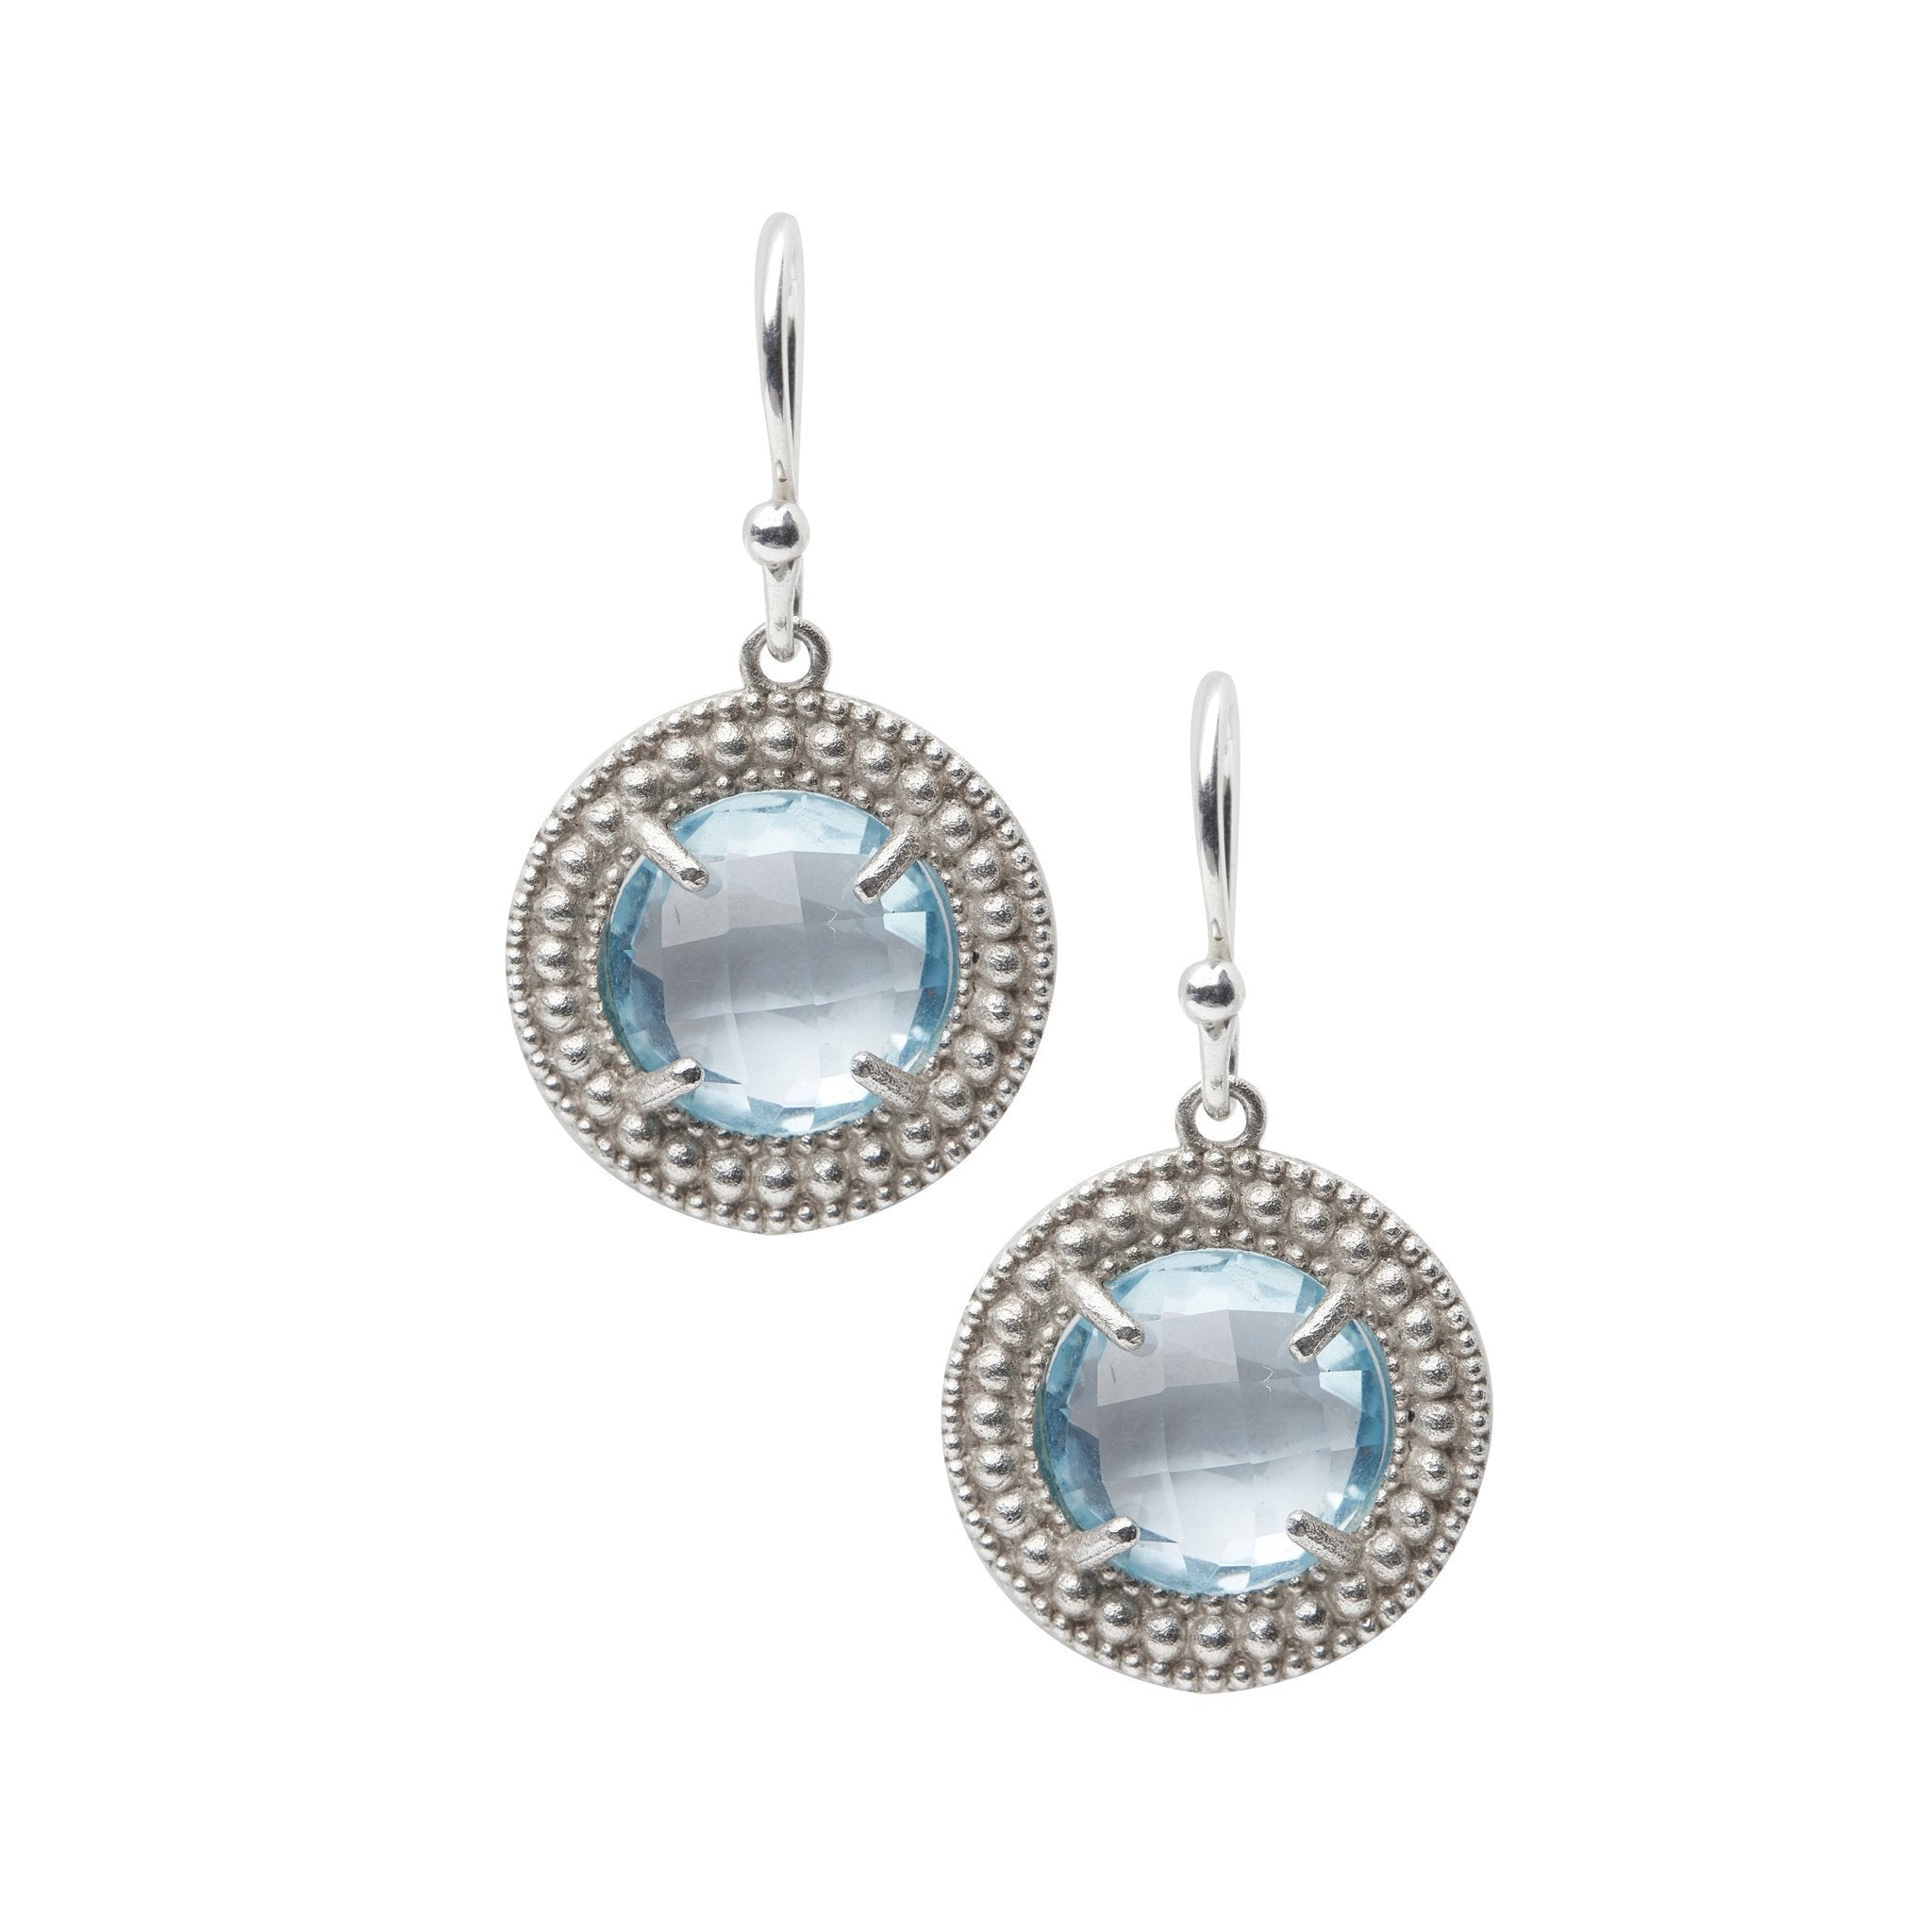 The Classic Earrings with blue topaz. - Christelle Chamberland